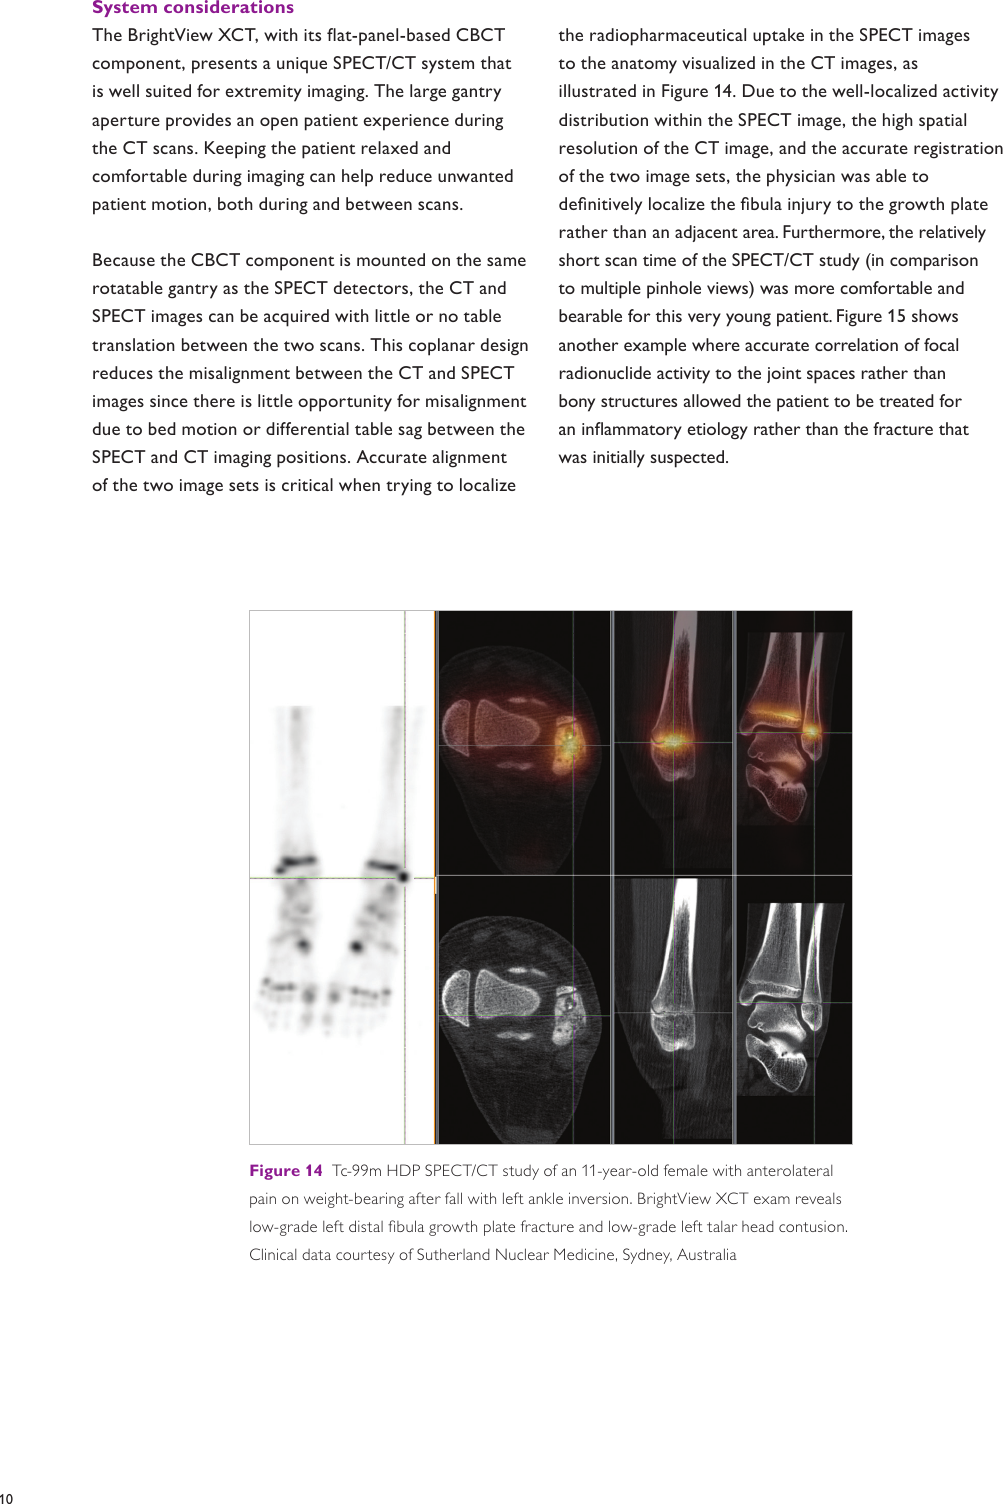 Page 10 of 12 - Philips 882482 User Manual Product Brochure Bright View SPECT/CT System XCT Df2a879f418243d9a589a77c01489b87